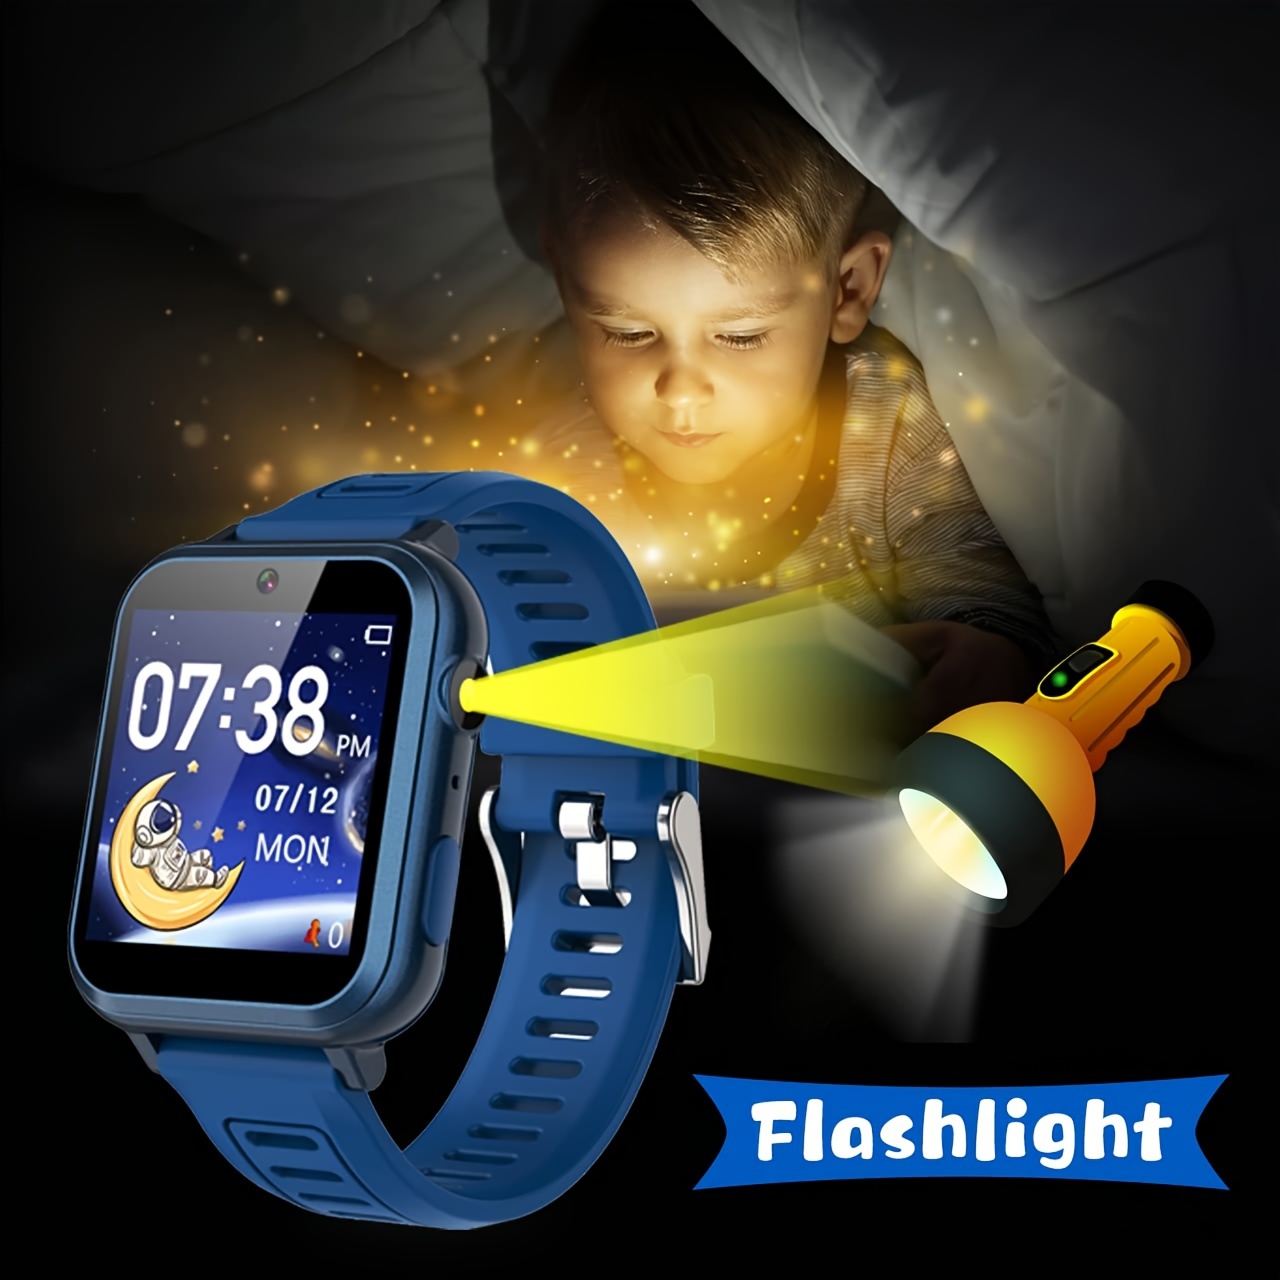 smart watch for children with 24 educational games hd touch screen camera music player pedometer alarm clock calculator watch childrens birthday holiday gift